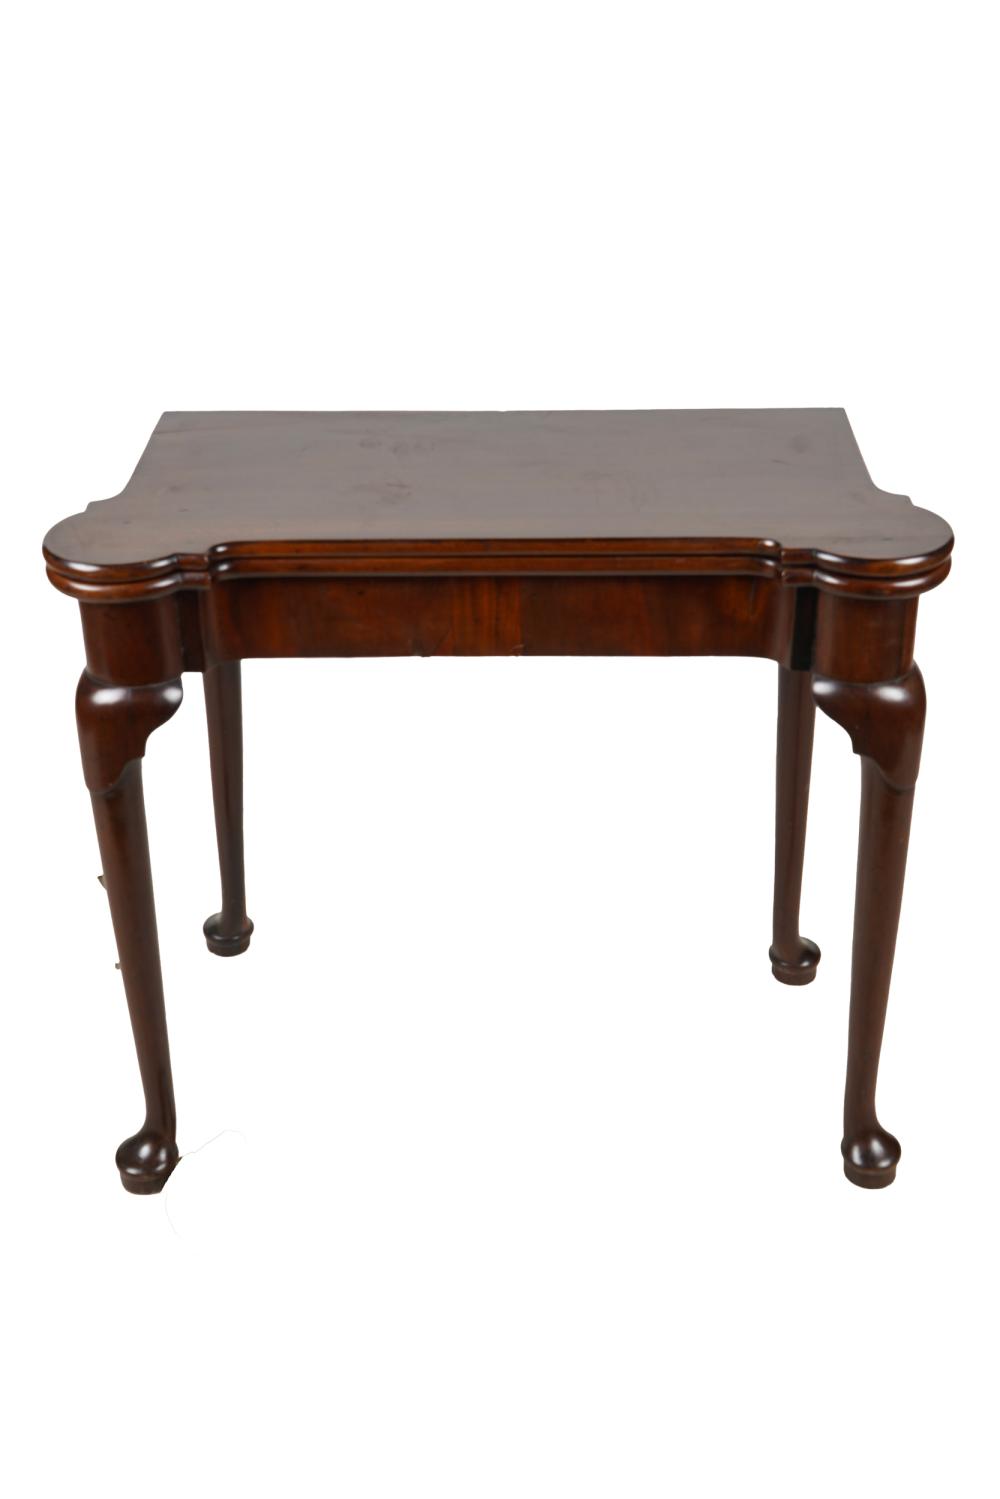 GEORGIAN STYLE FLIP TOP GAME TABLEmahogany  337307